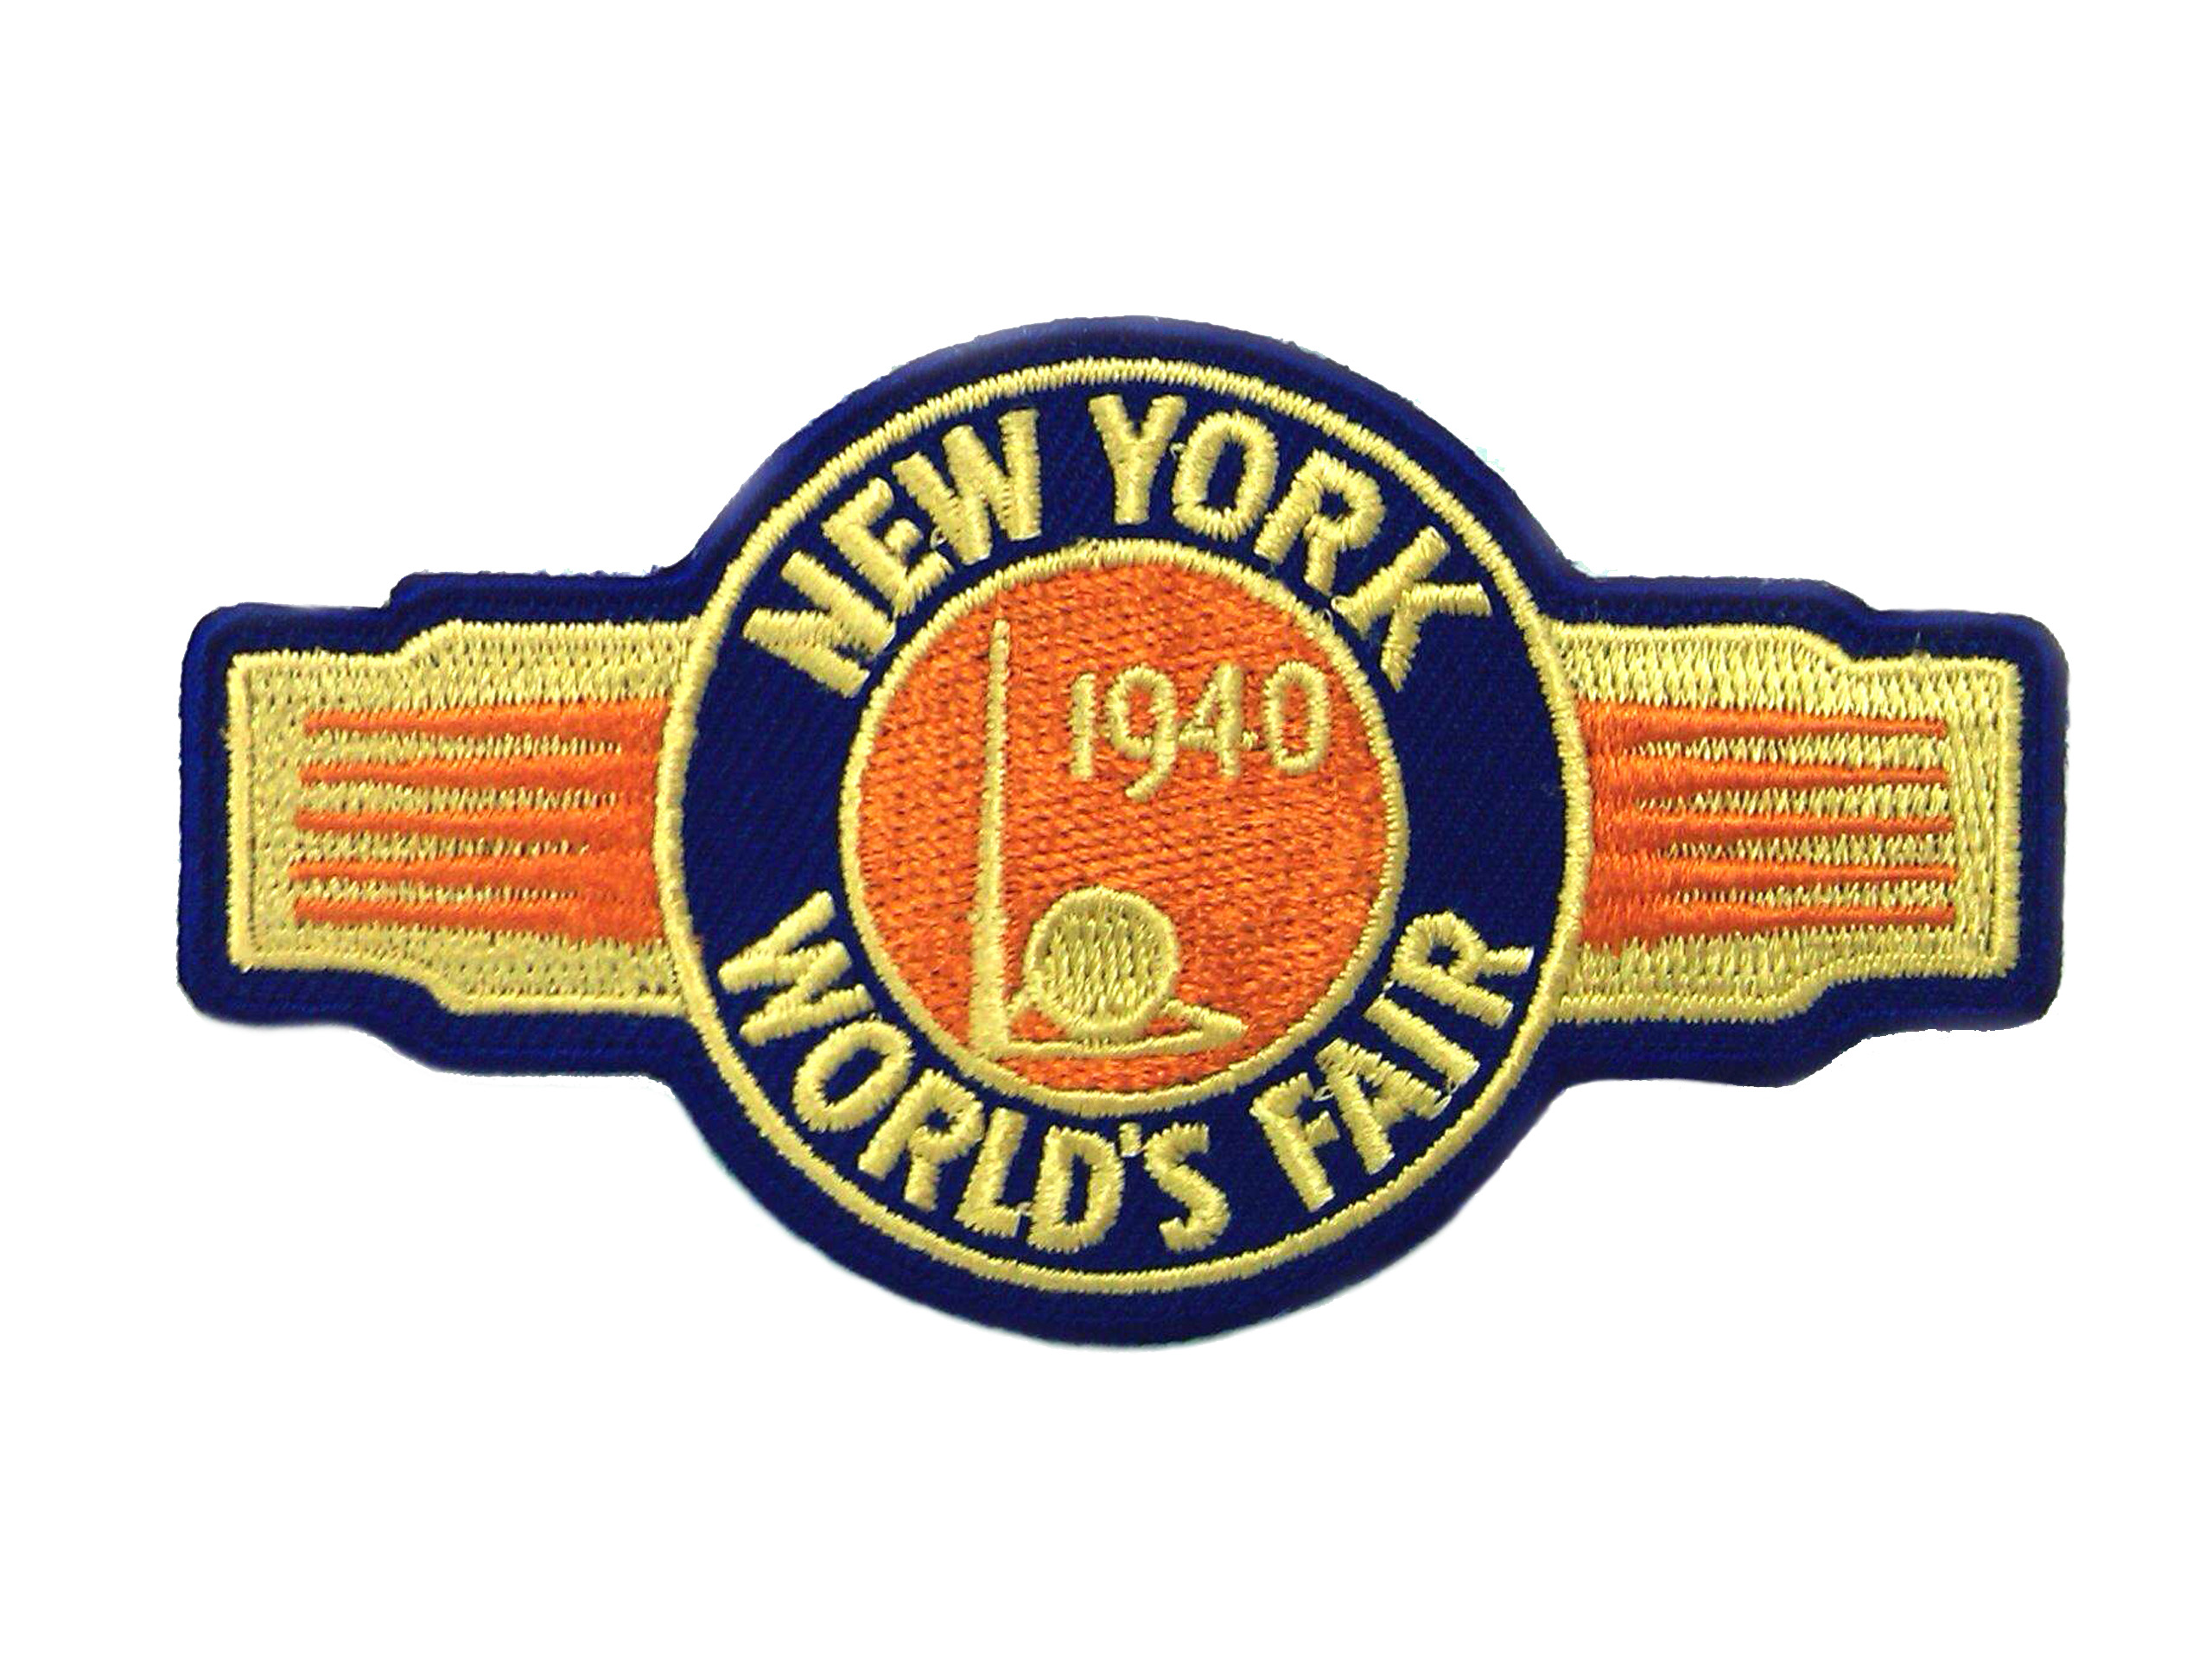 World's Fair 1940 Patches